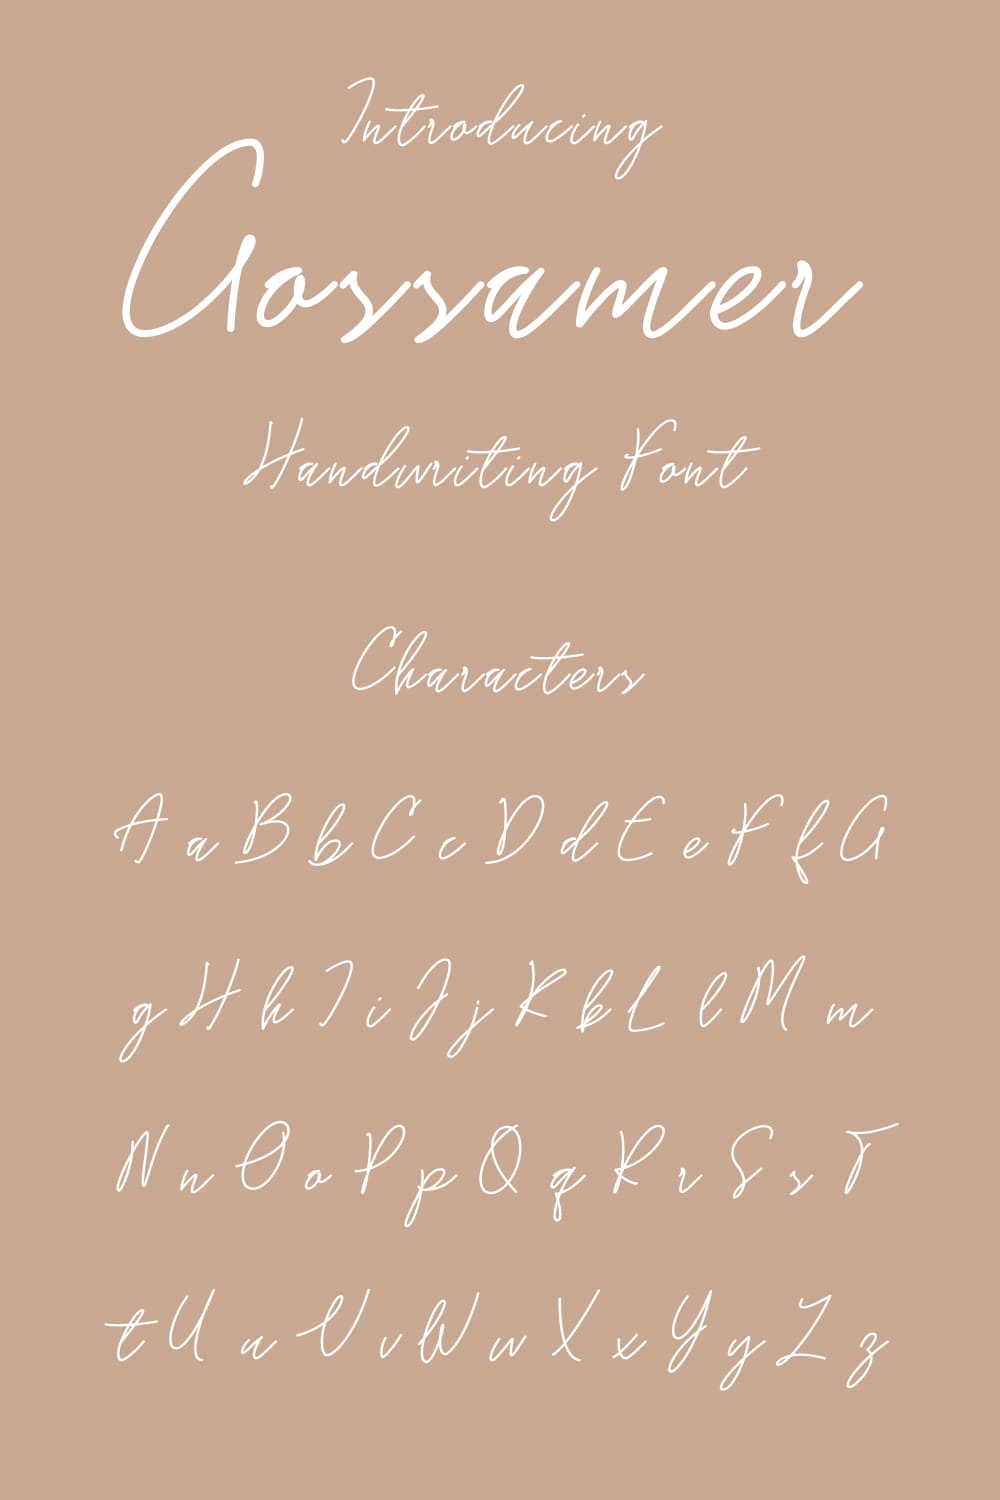 Pinterest Collage Image with Gossamer Handwriting Font Chracters Preview by MasterBundles.